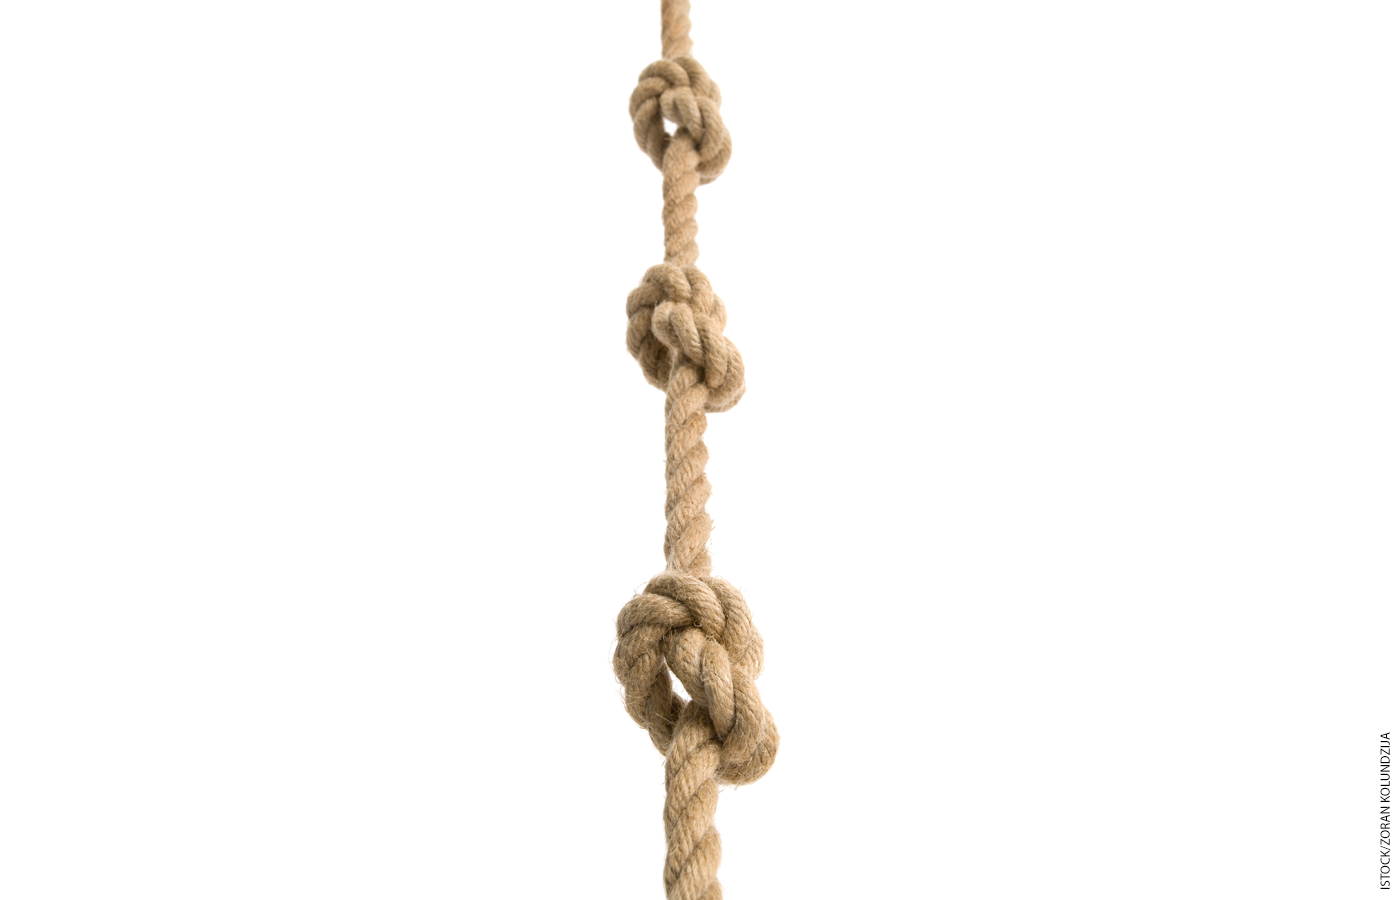 A climbing rope with three knots